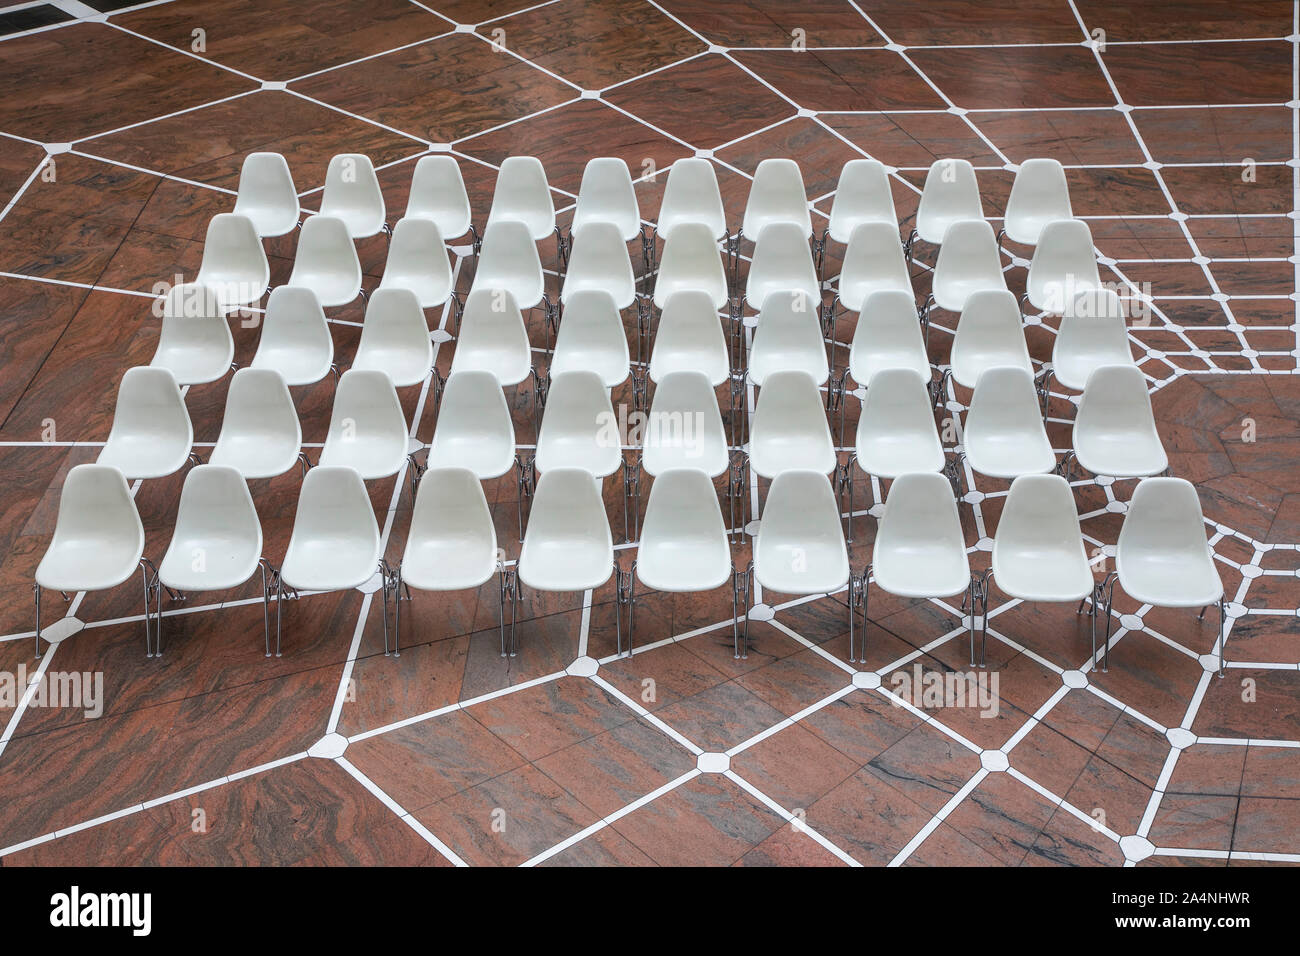 Many white bowls, lined up, Stock Photo